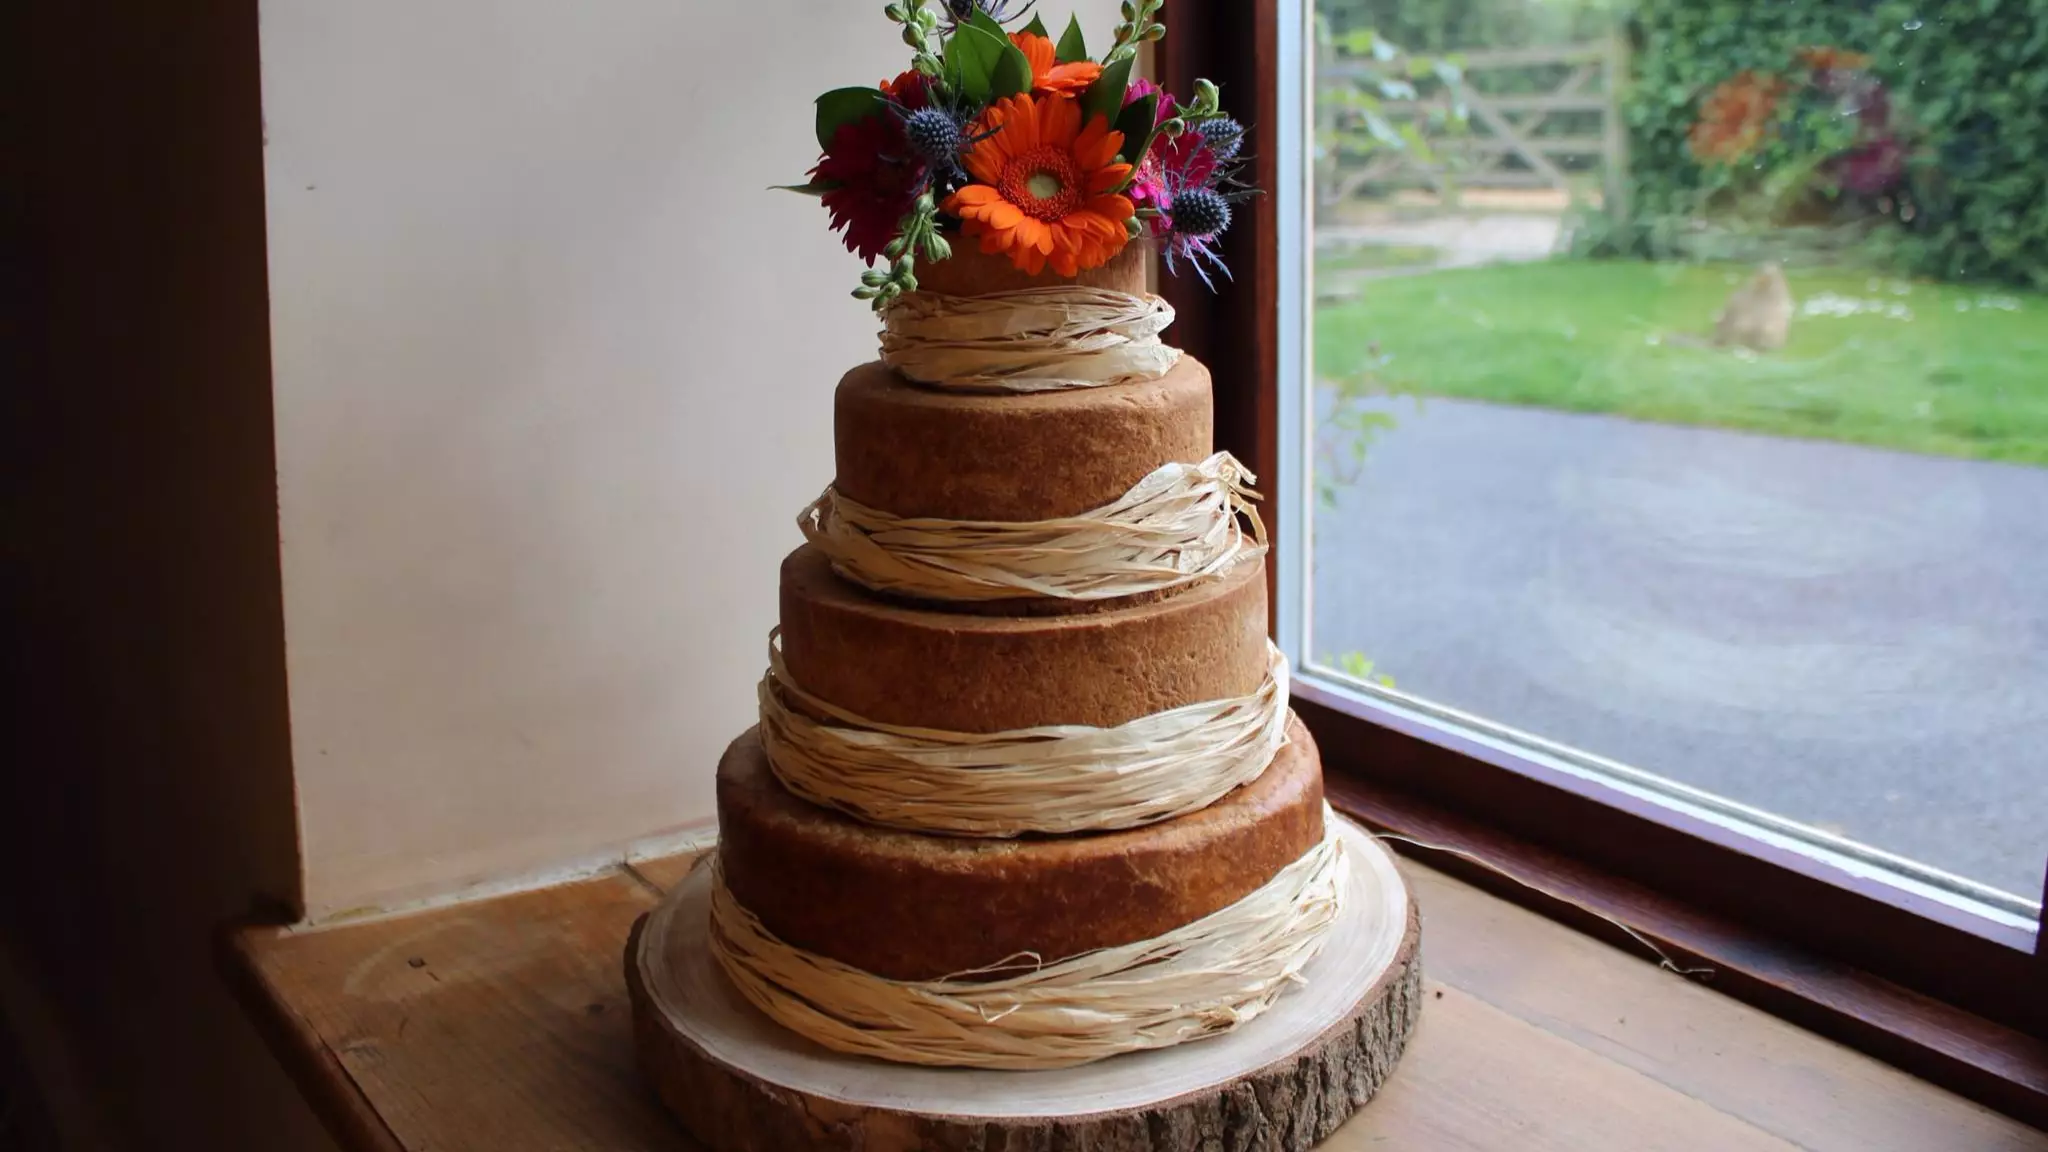 There's A Pork Pie Wedding Cake, And You're Going To Want One